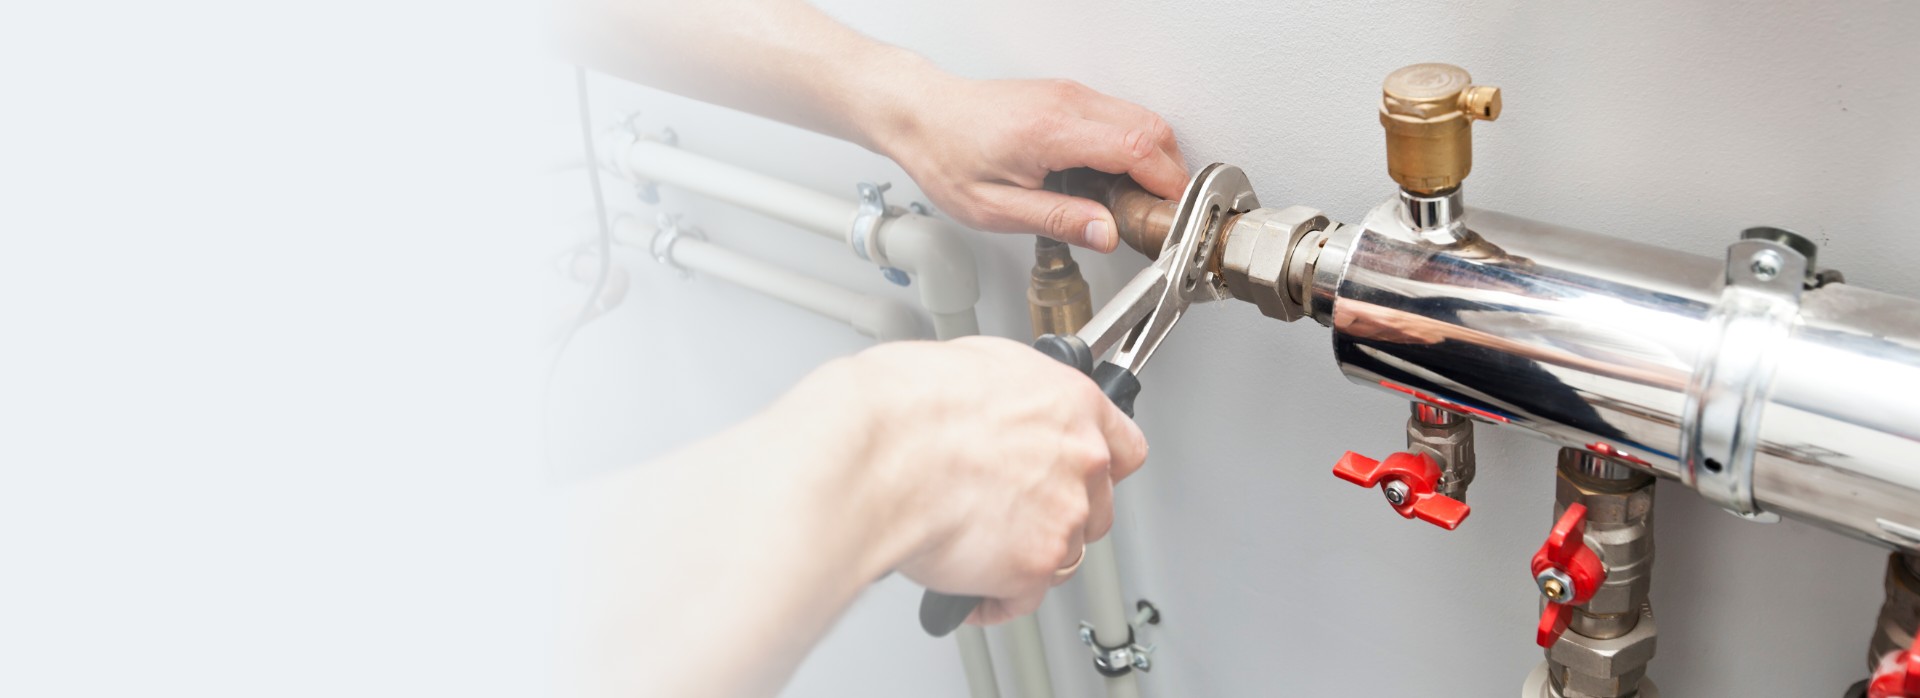 Prompt commercial plumbing services 24/7